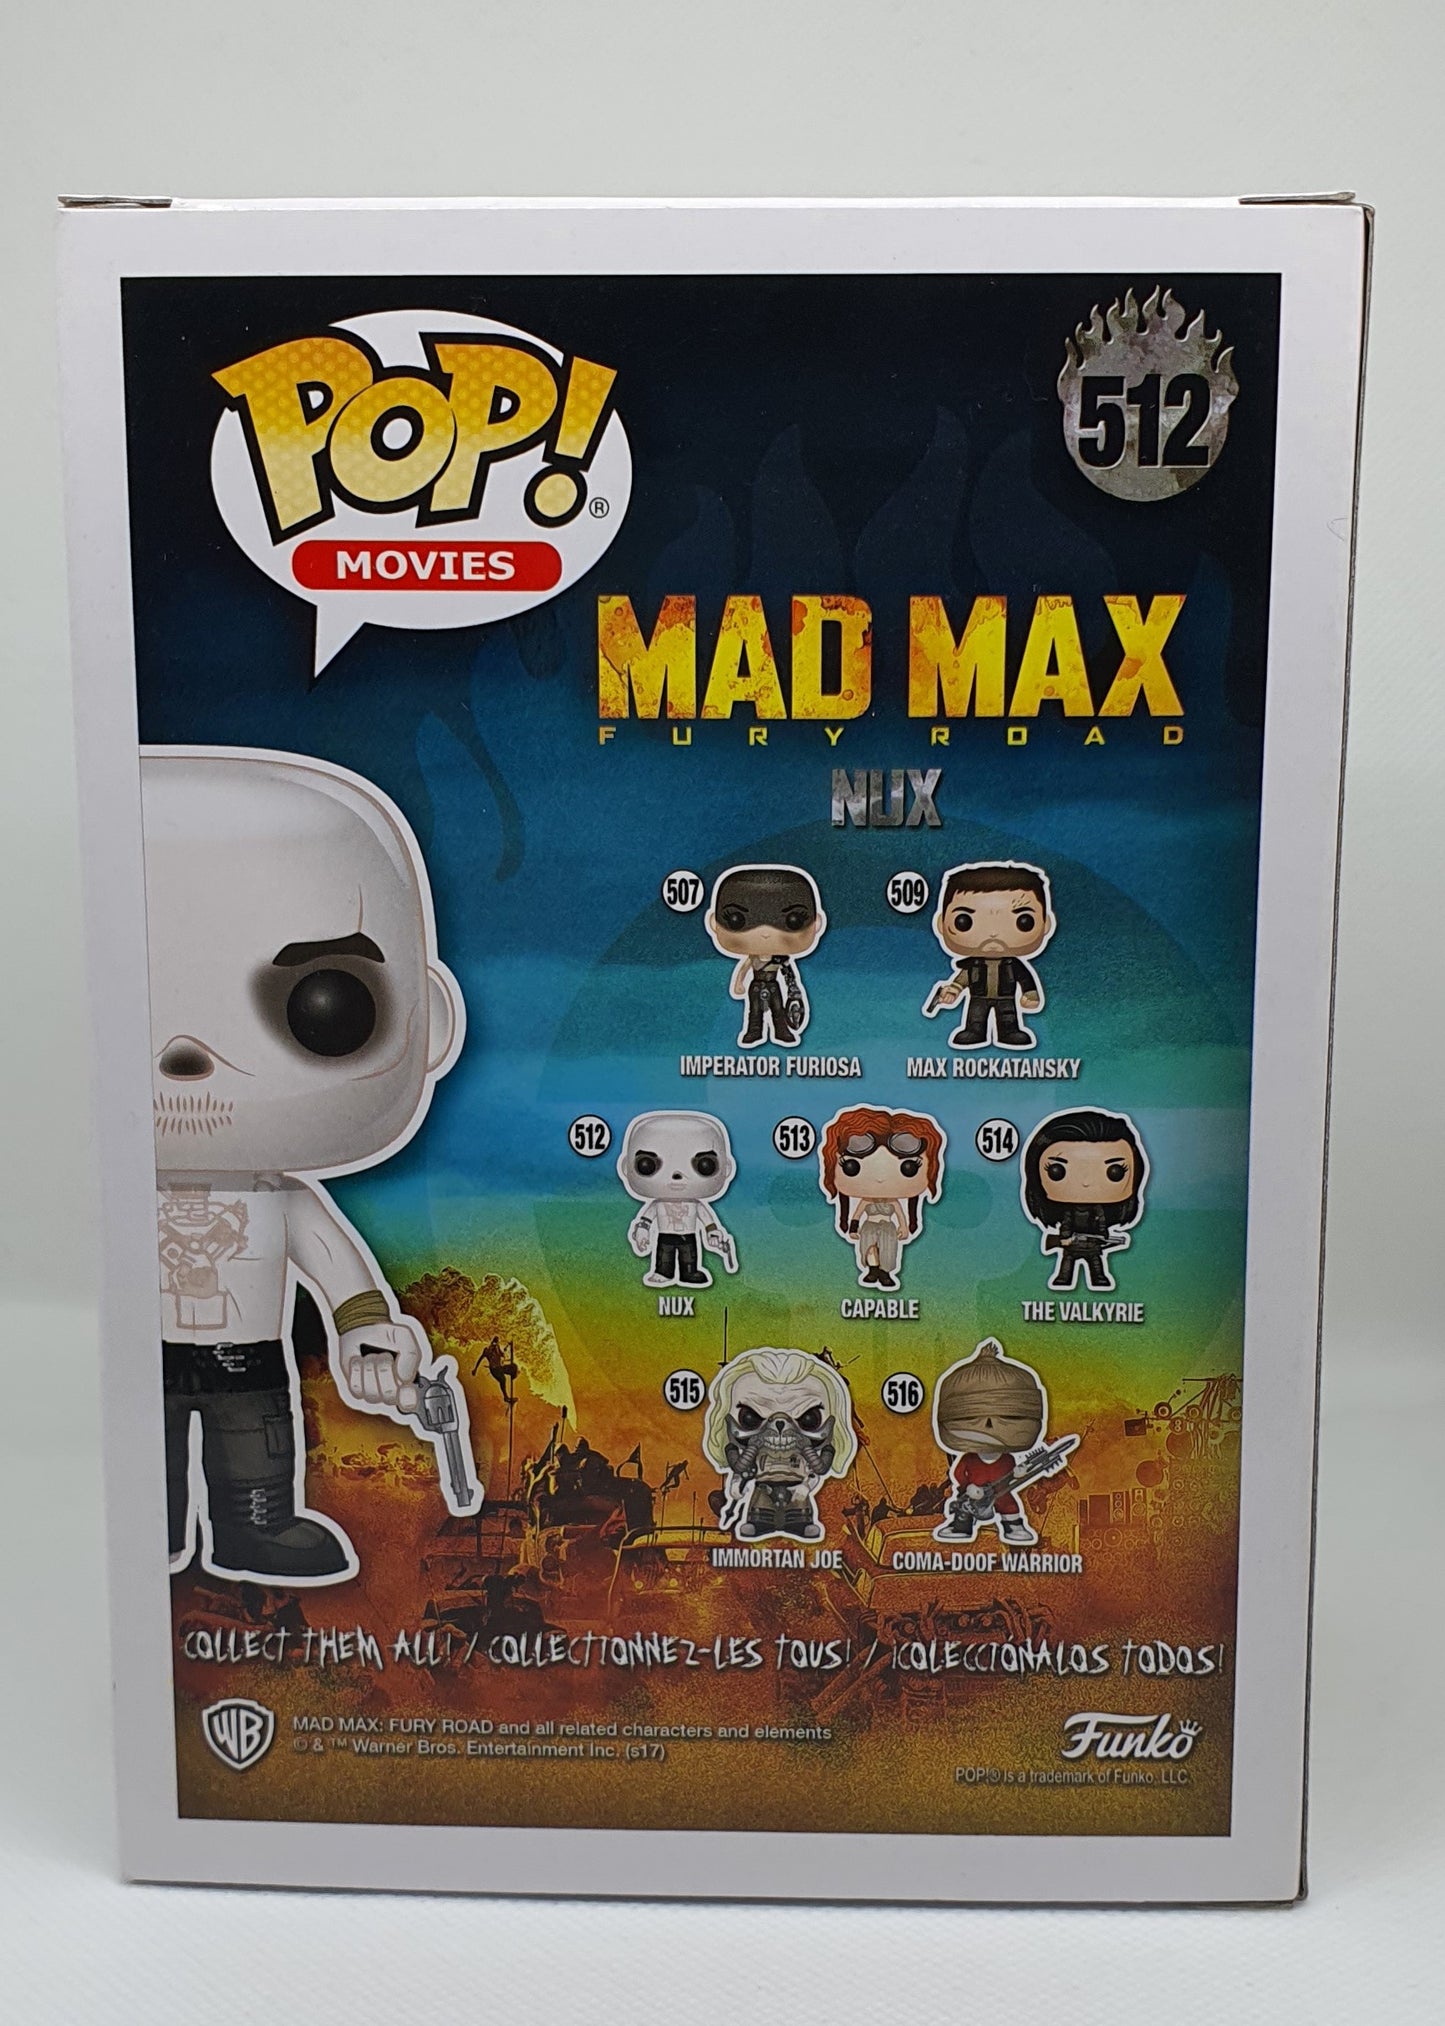 512 - MOVIES - MAD MAX - NUX